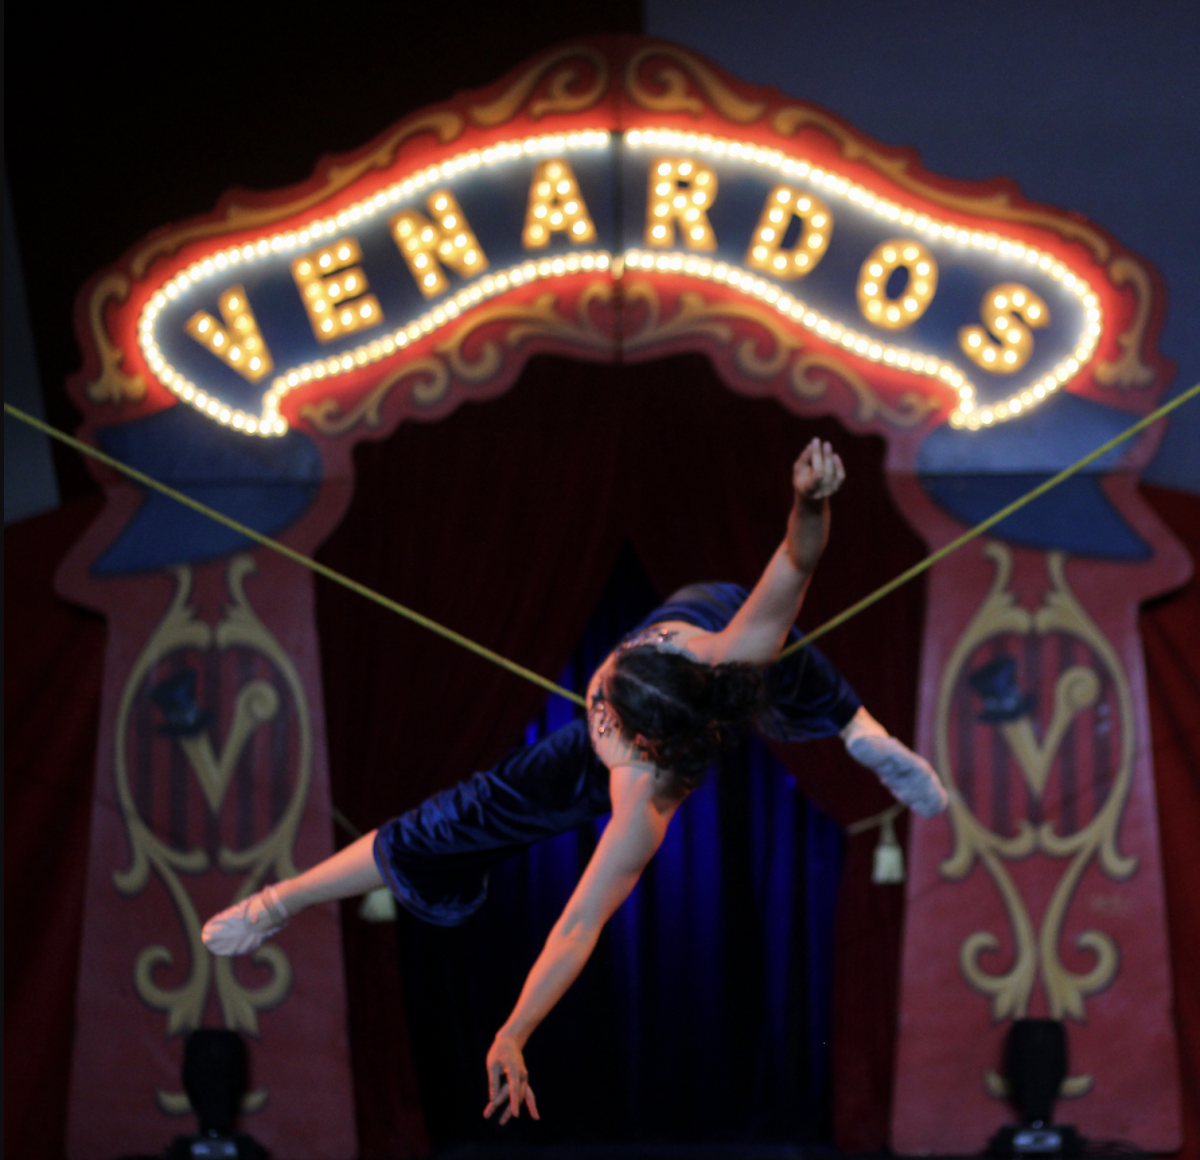 Fine Line- Performer balances on a tight rope at Venardos Circus. Photo by Erica Fields.